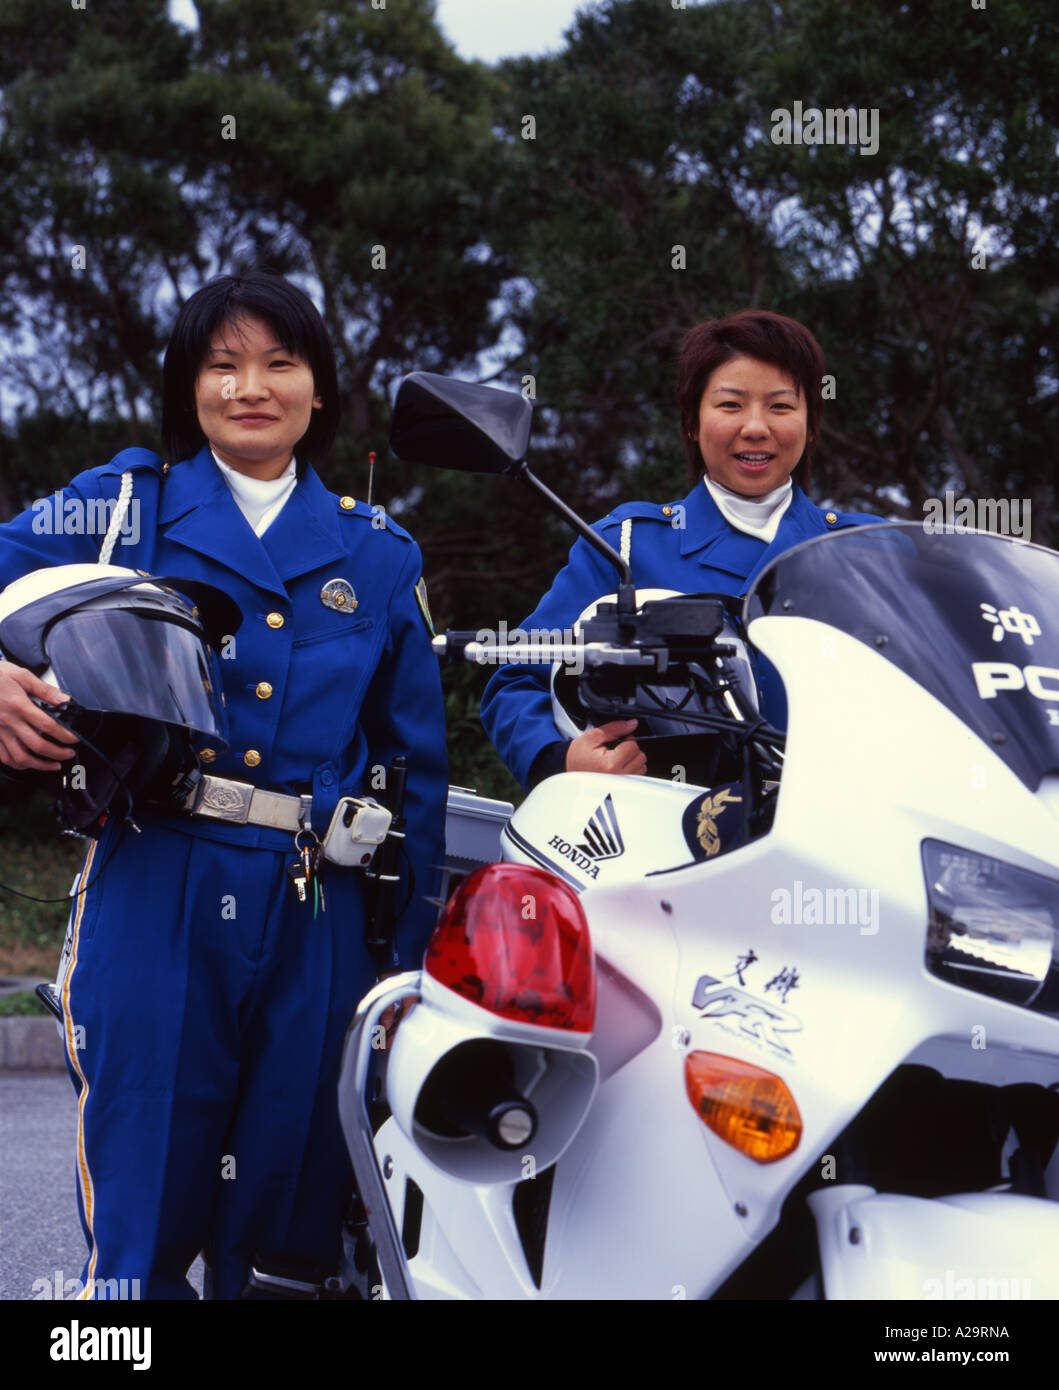 Female Police Motorcycle Officers and their Honda 750cc bike, Okianwa, Japan Stock Photo